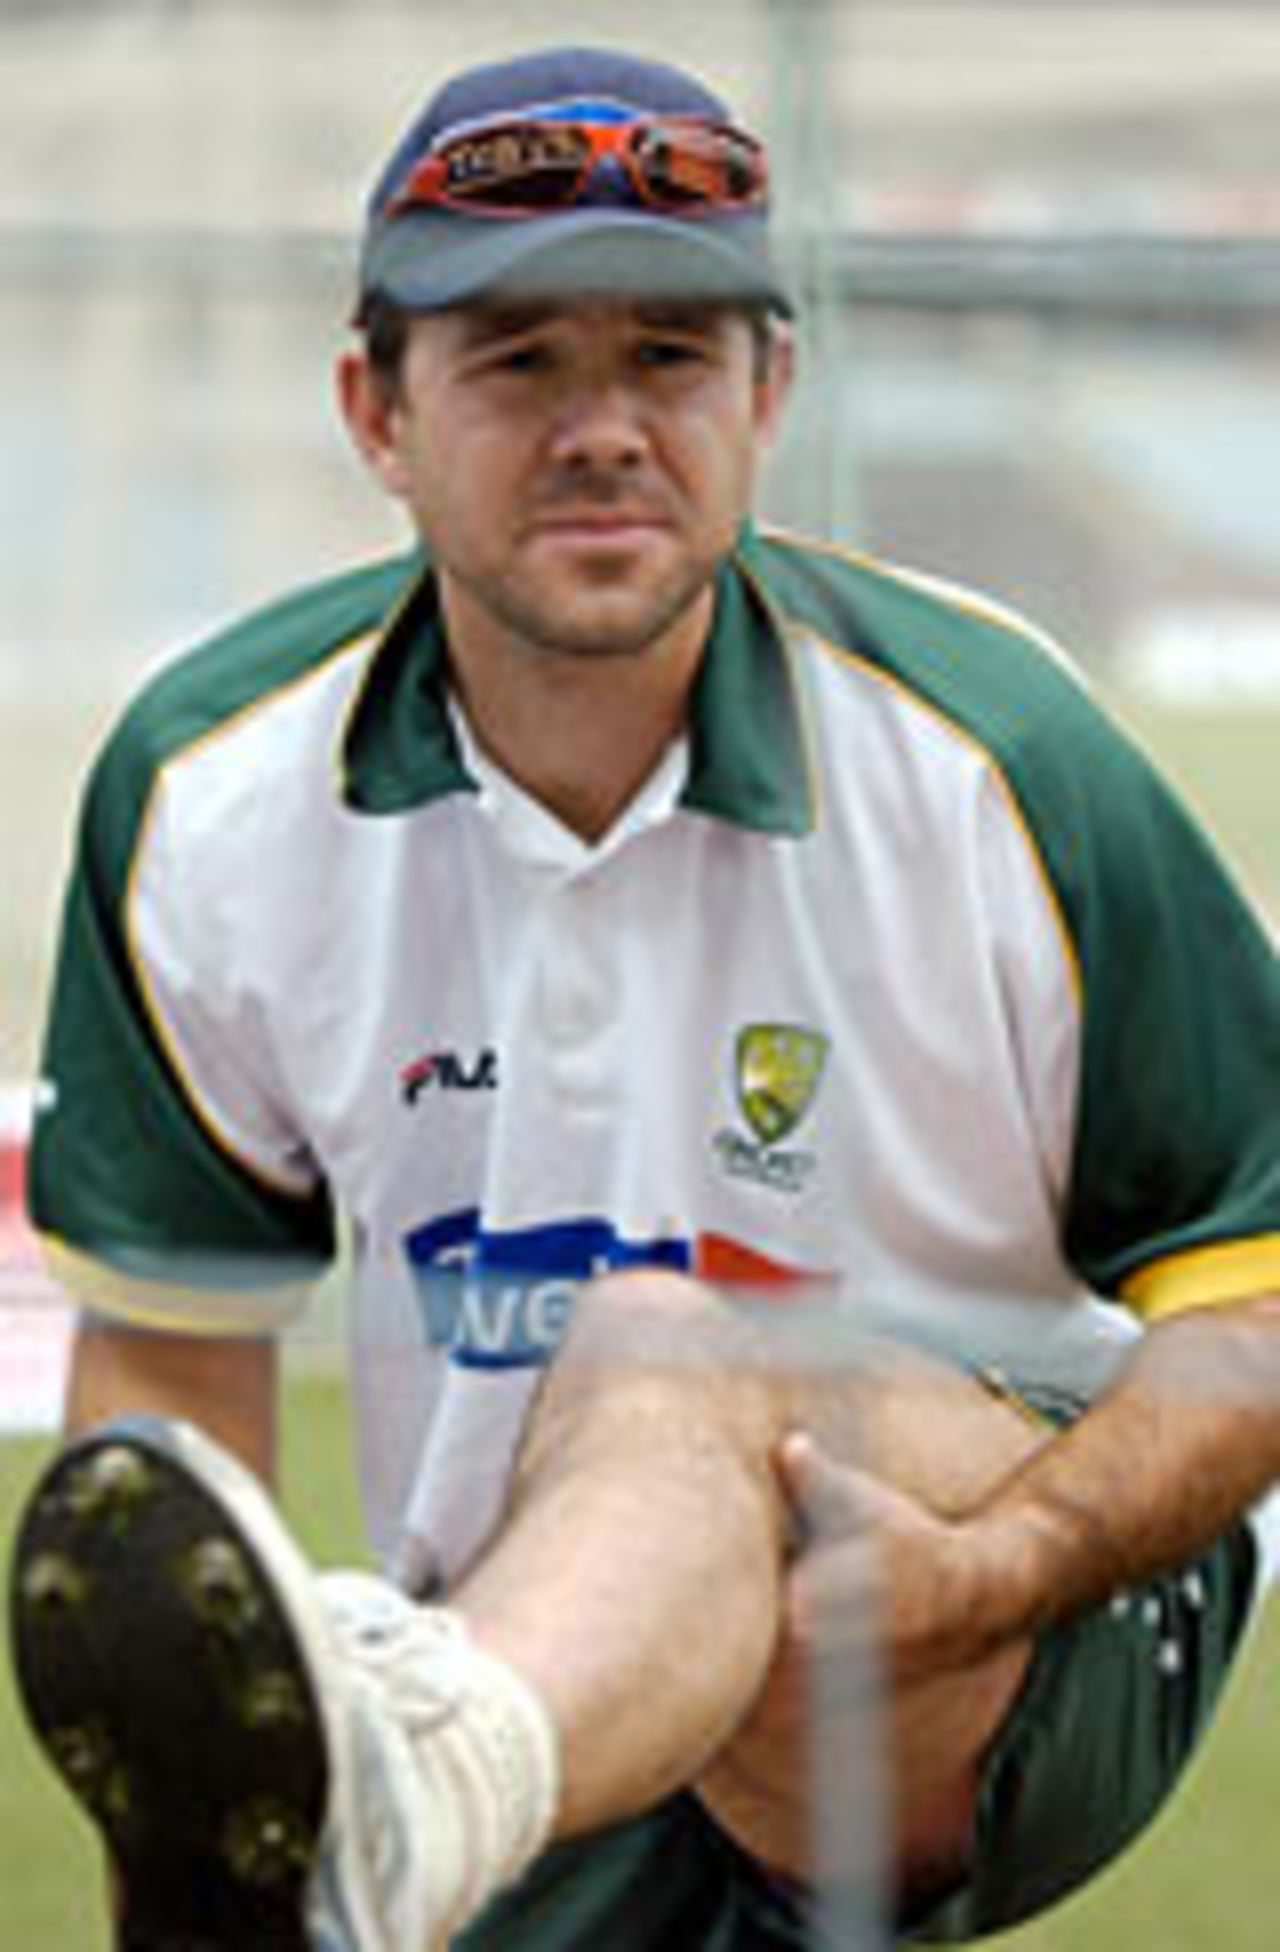 Ricky Ponting warms up as Australia prepare to meet India in the TVS Cup final, November 16, 2003